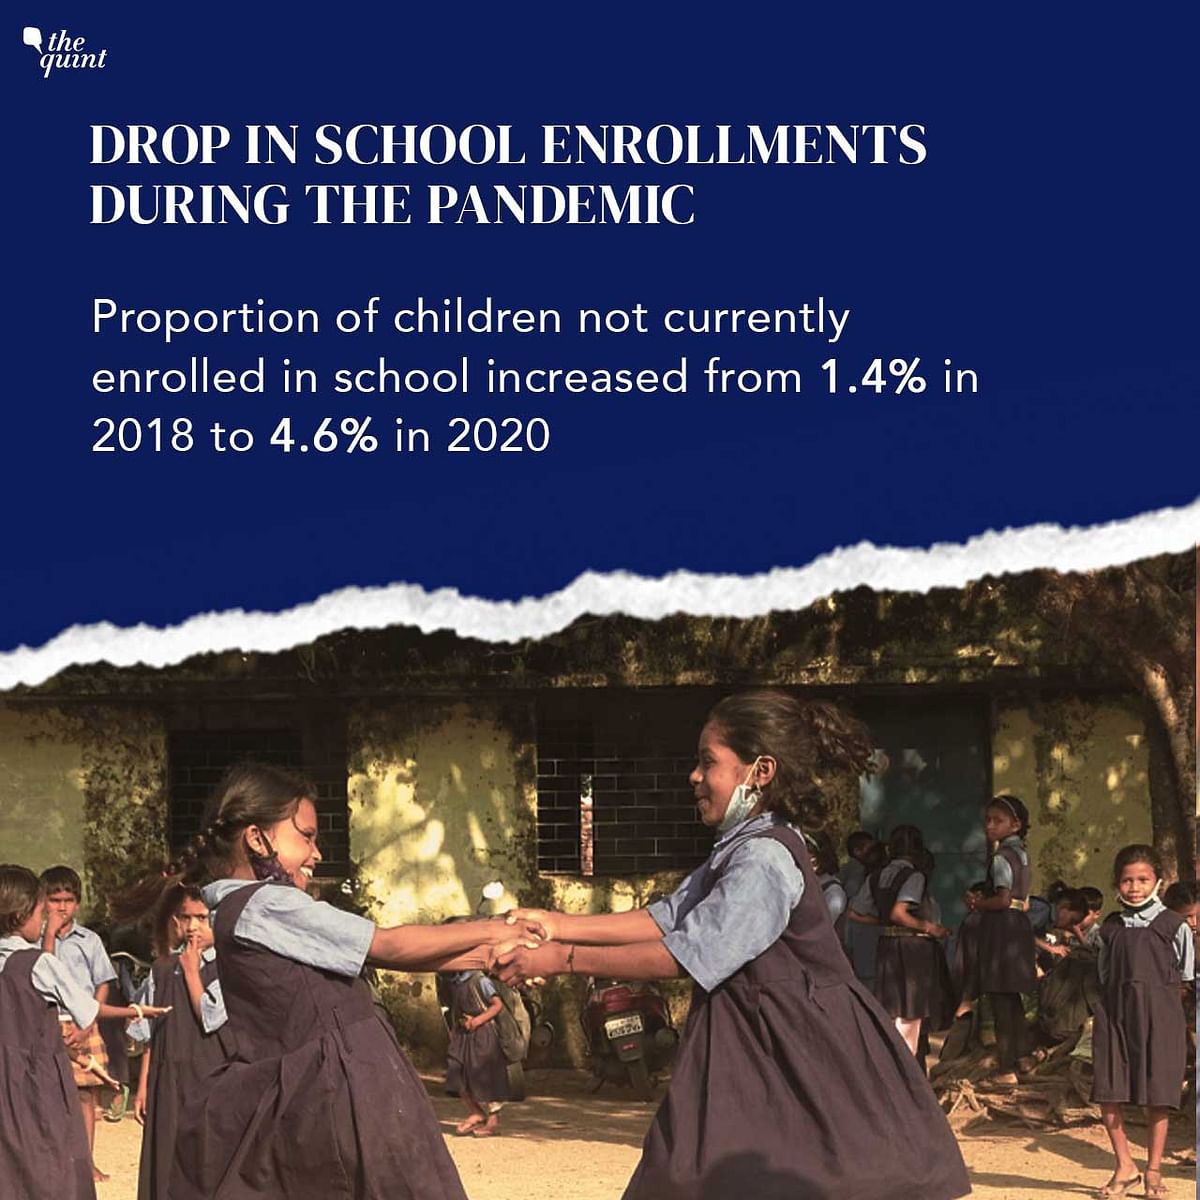 The national increase in government school enrollment is driven by states like UP, Rajasthan, and Punjab.